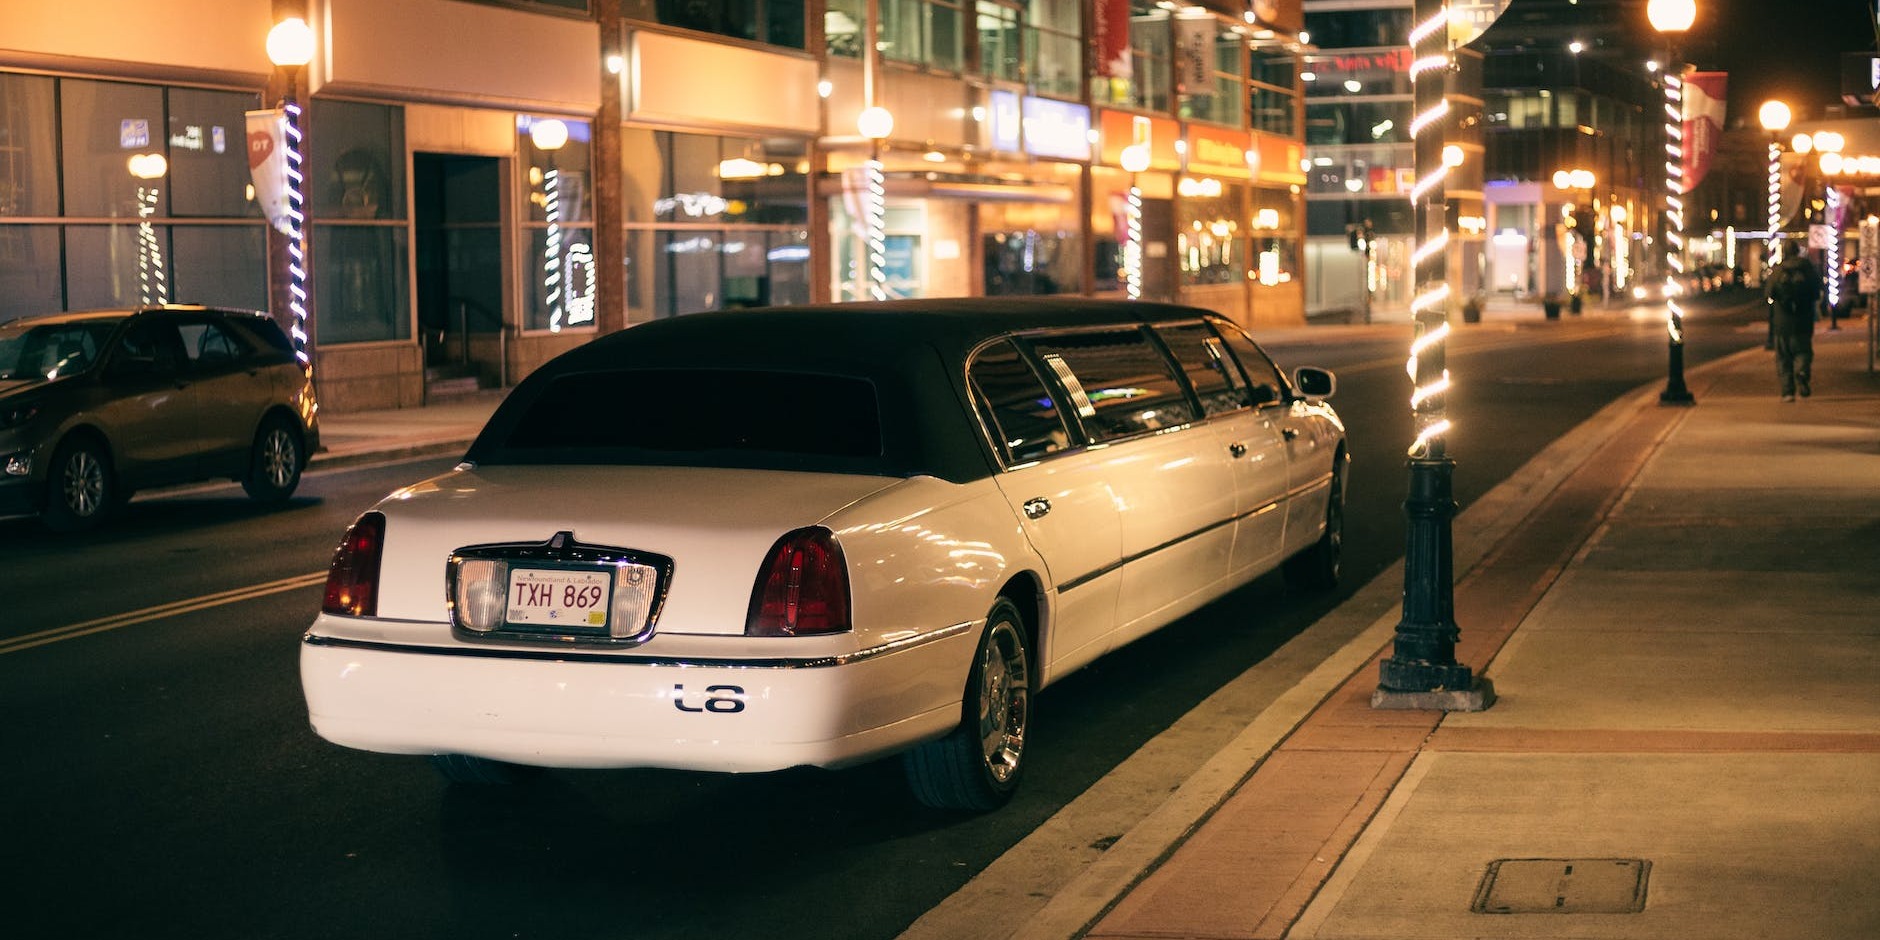 Transform Your Prom Night with Last Minute Limo Hire in Bristol